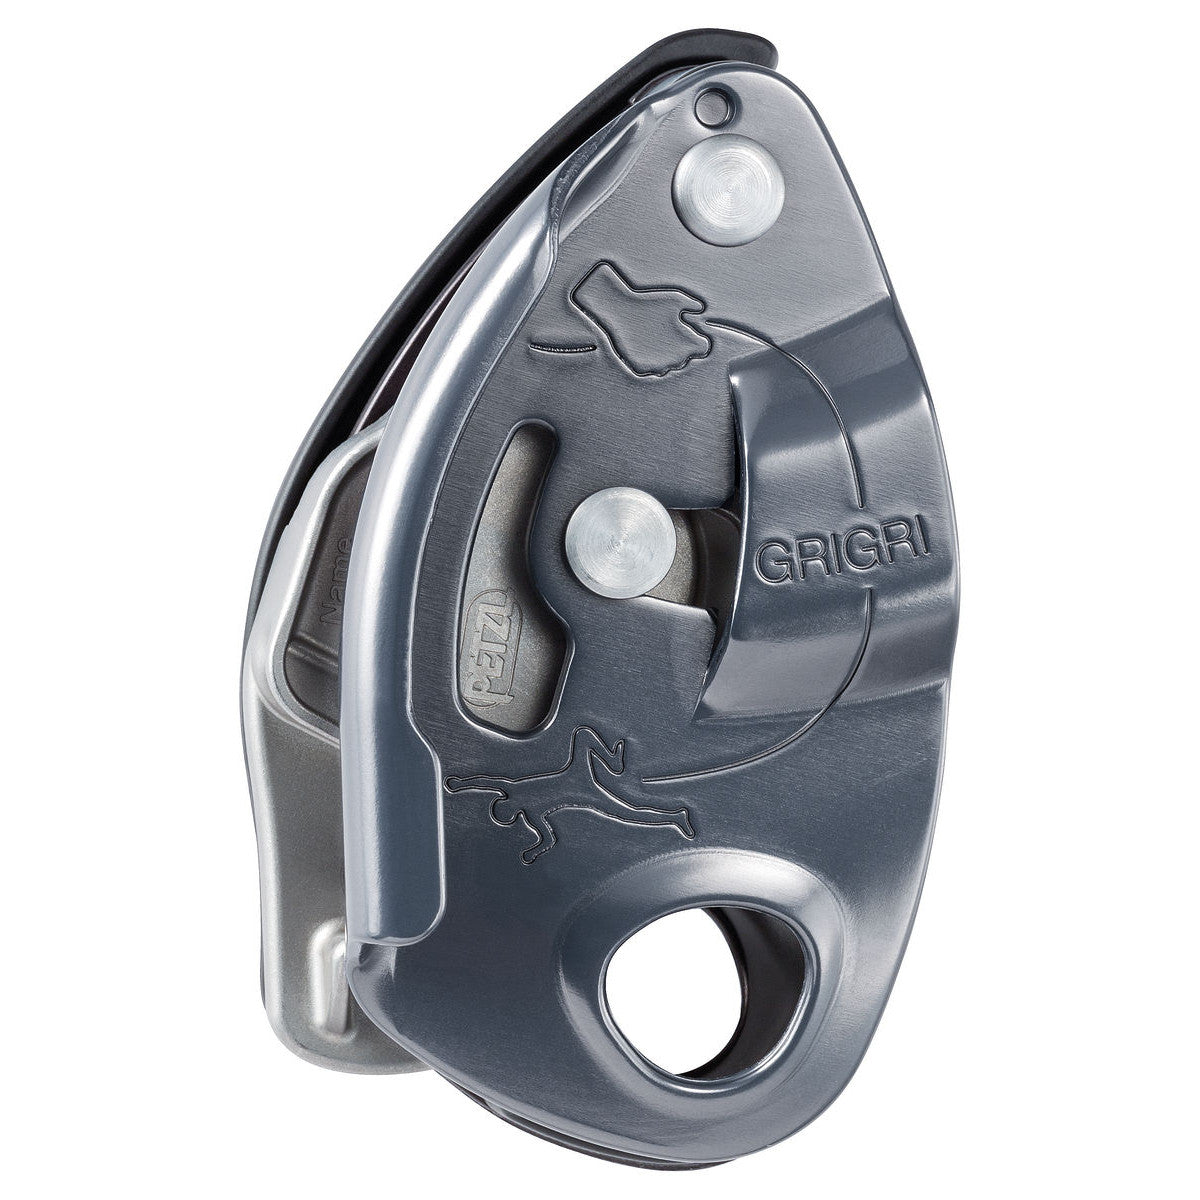 Petzl Grigri belay device, showing side view in silver colour